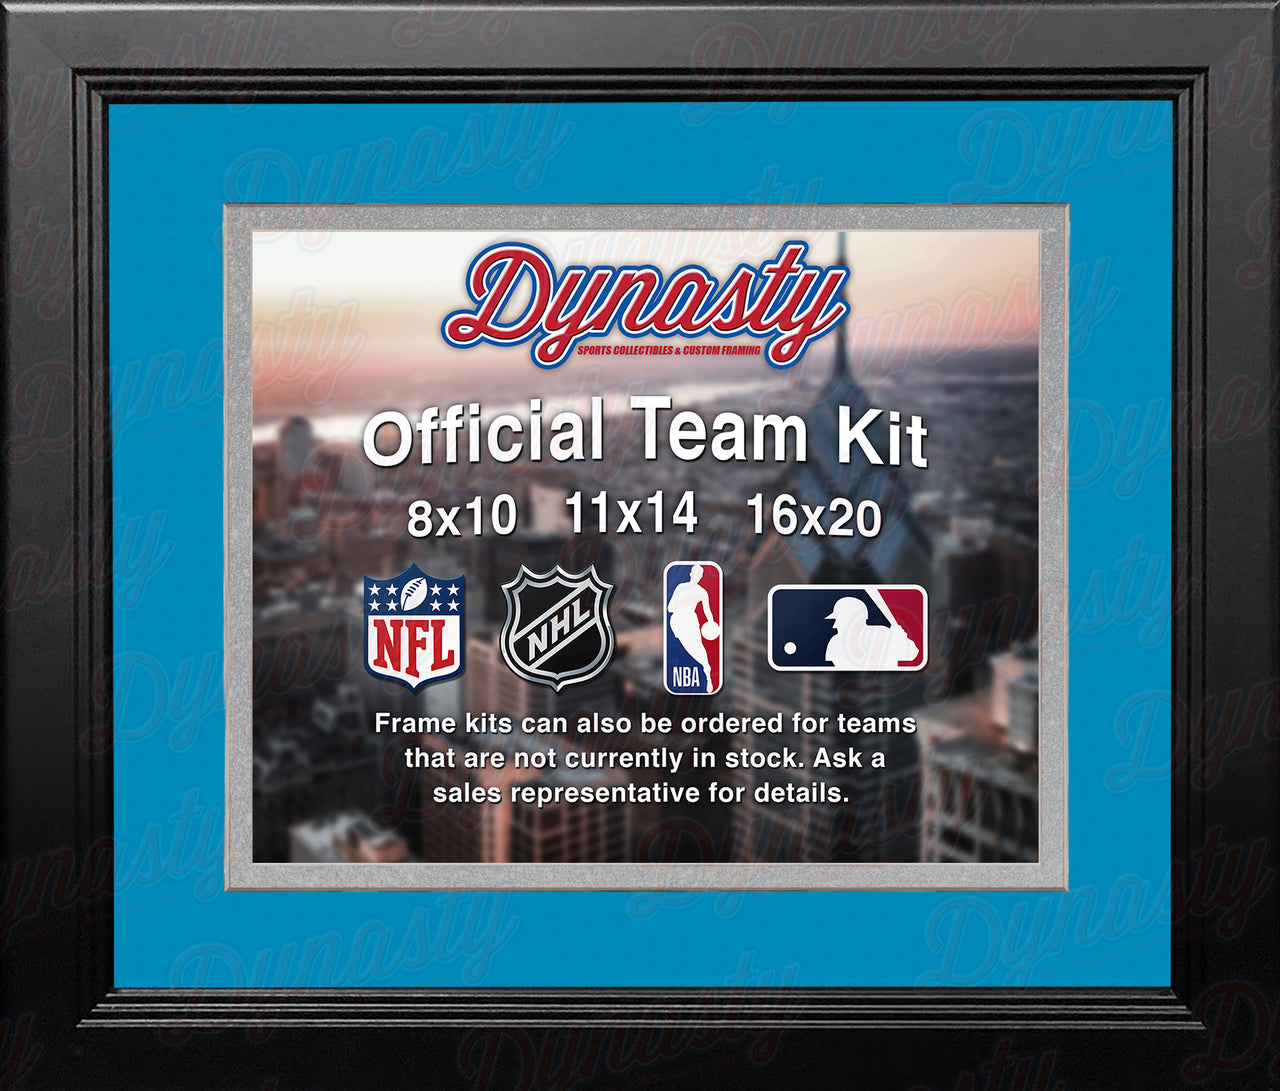 NFL Football Photo Picture Frame Kit - Detroit Lions (Blue Matting, Silver Trim) - Dynasty Sports & Framing 